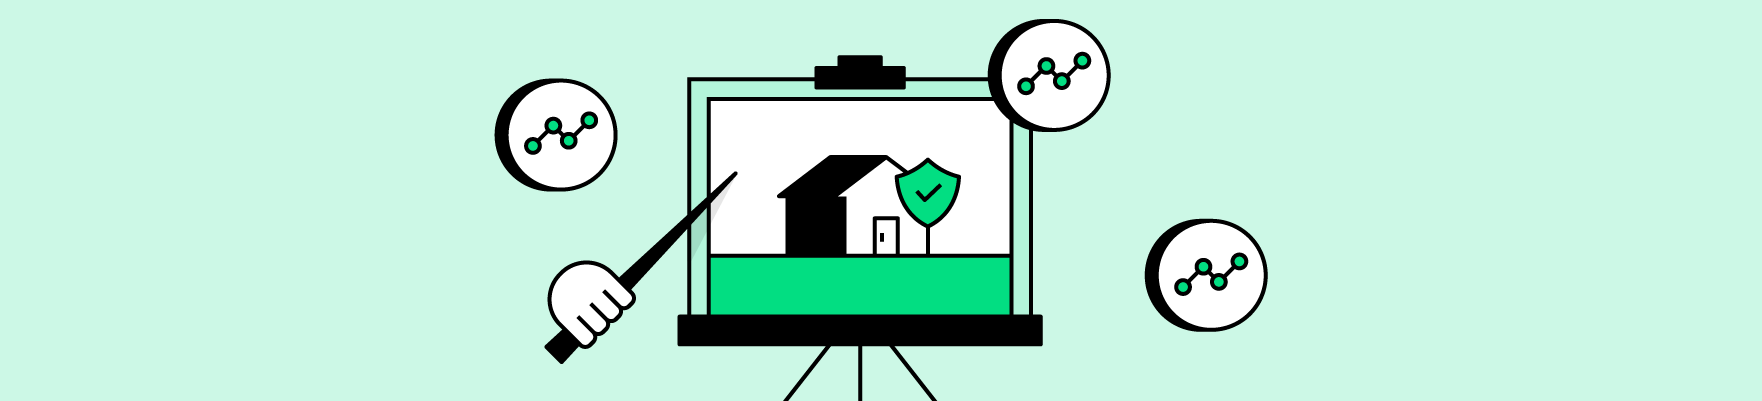 Illustration of a projection screen displaying a house with a shield icon over it